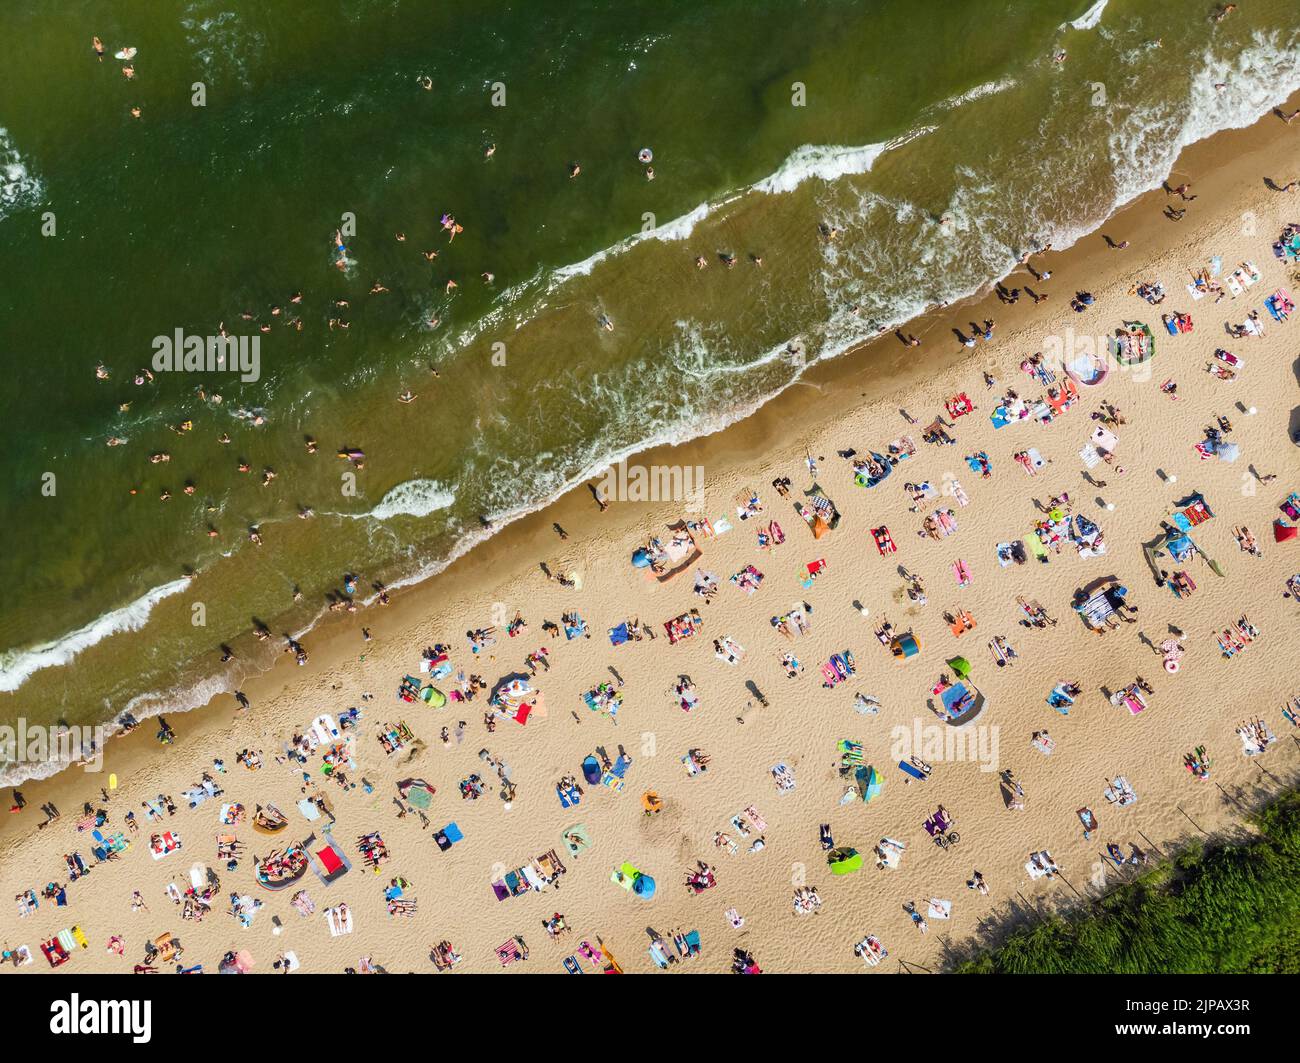 People at the beach during hot summer day Stock Photo